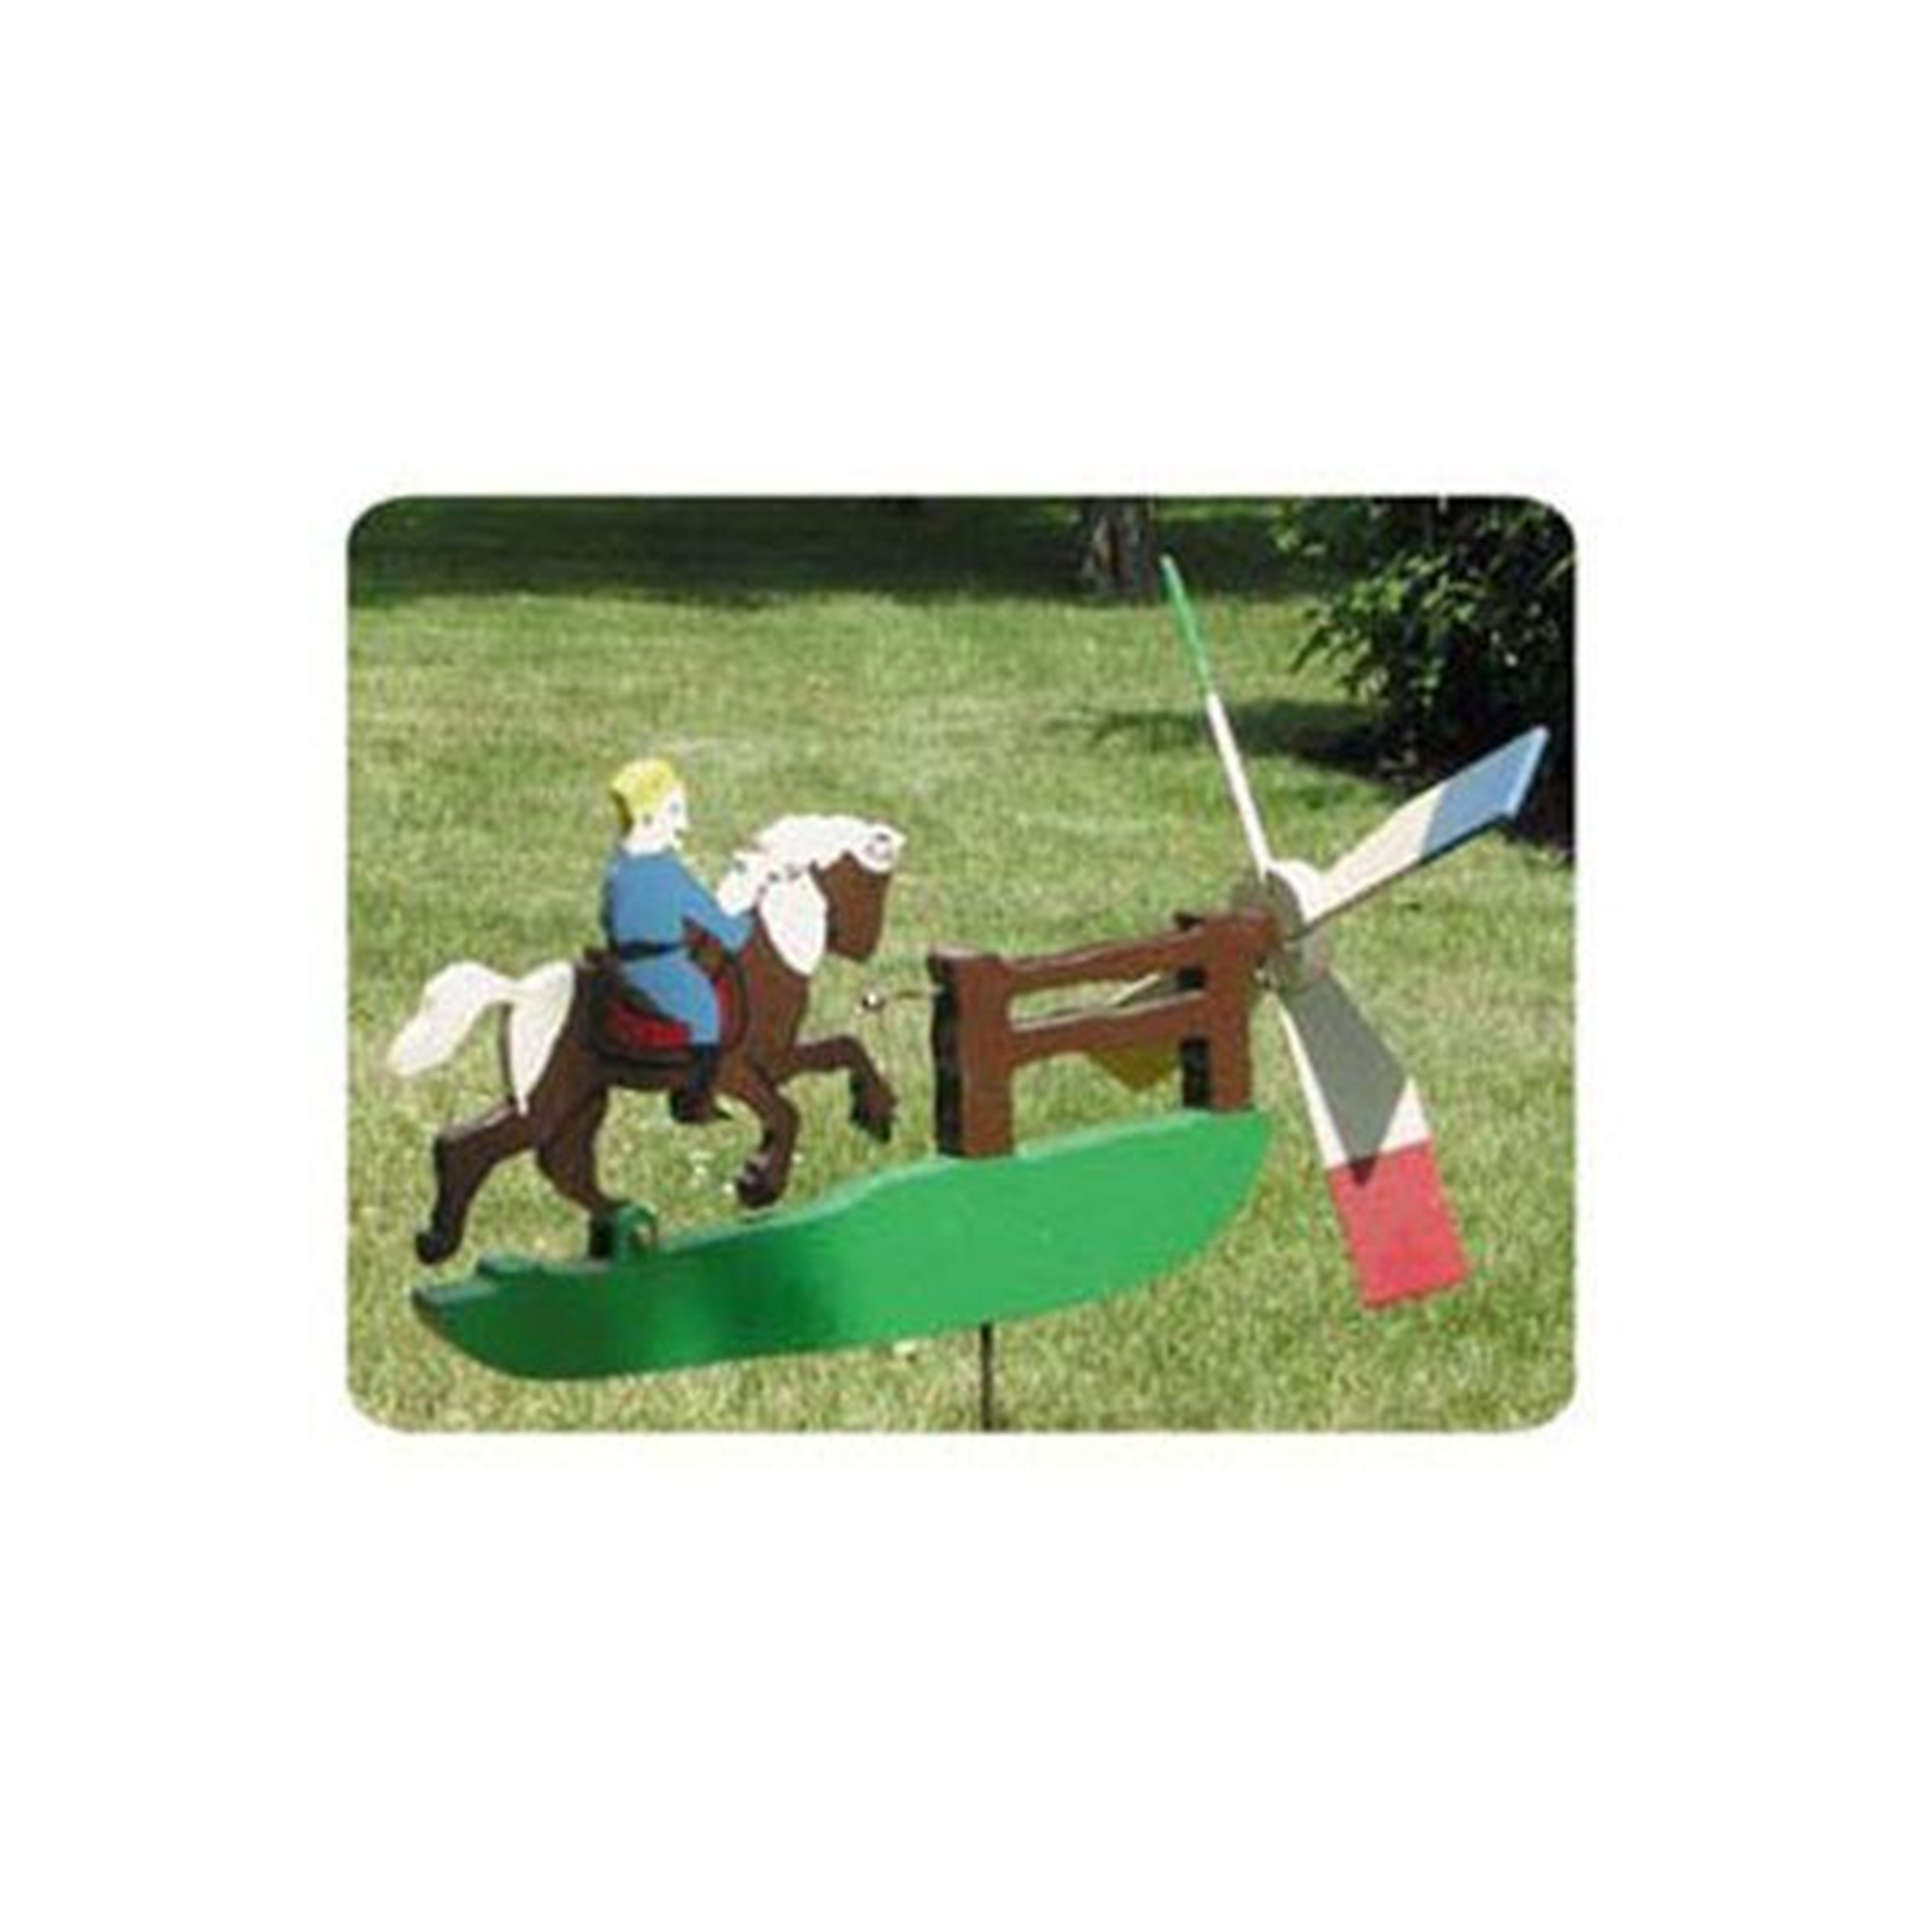 Woodworking Project Paper Plan To Build Galloping Horse Whirligig